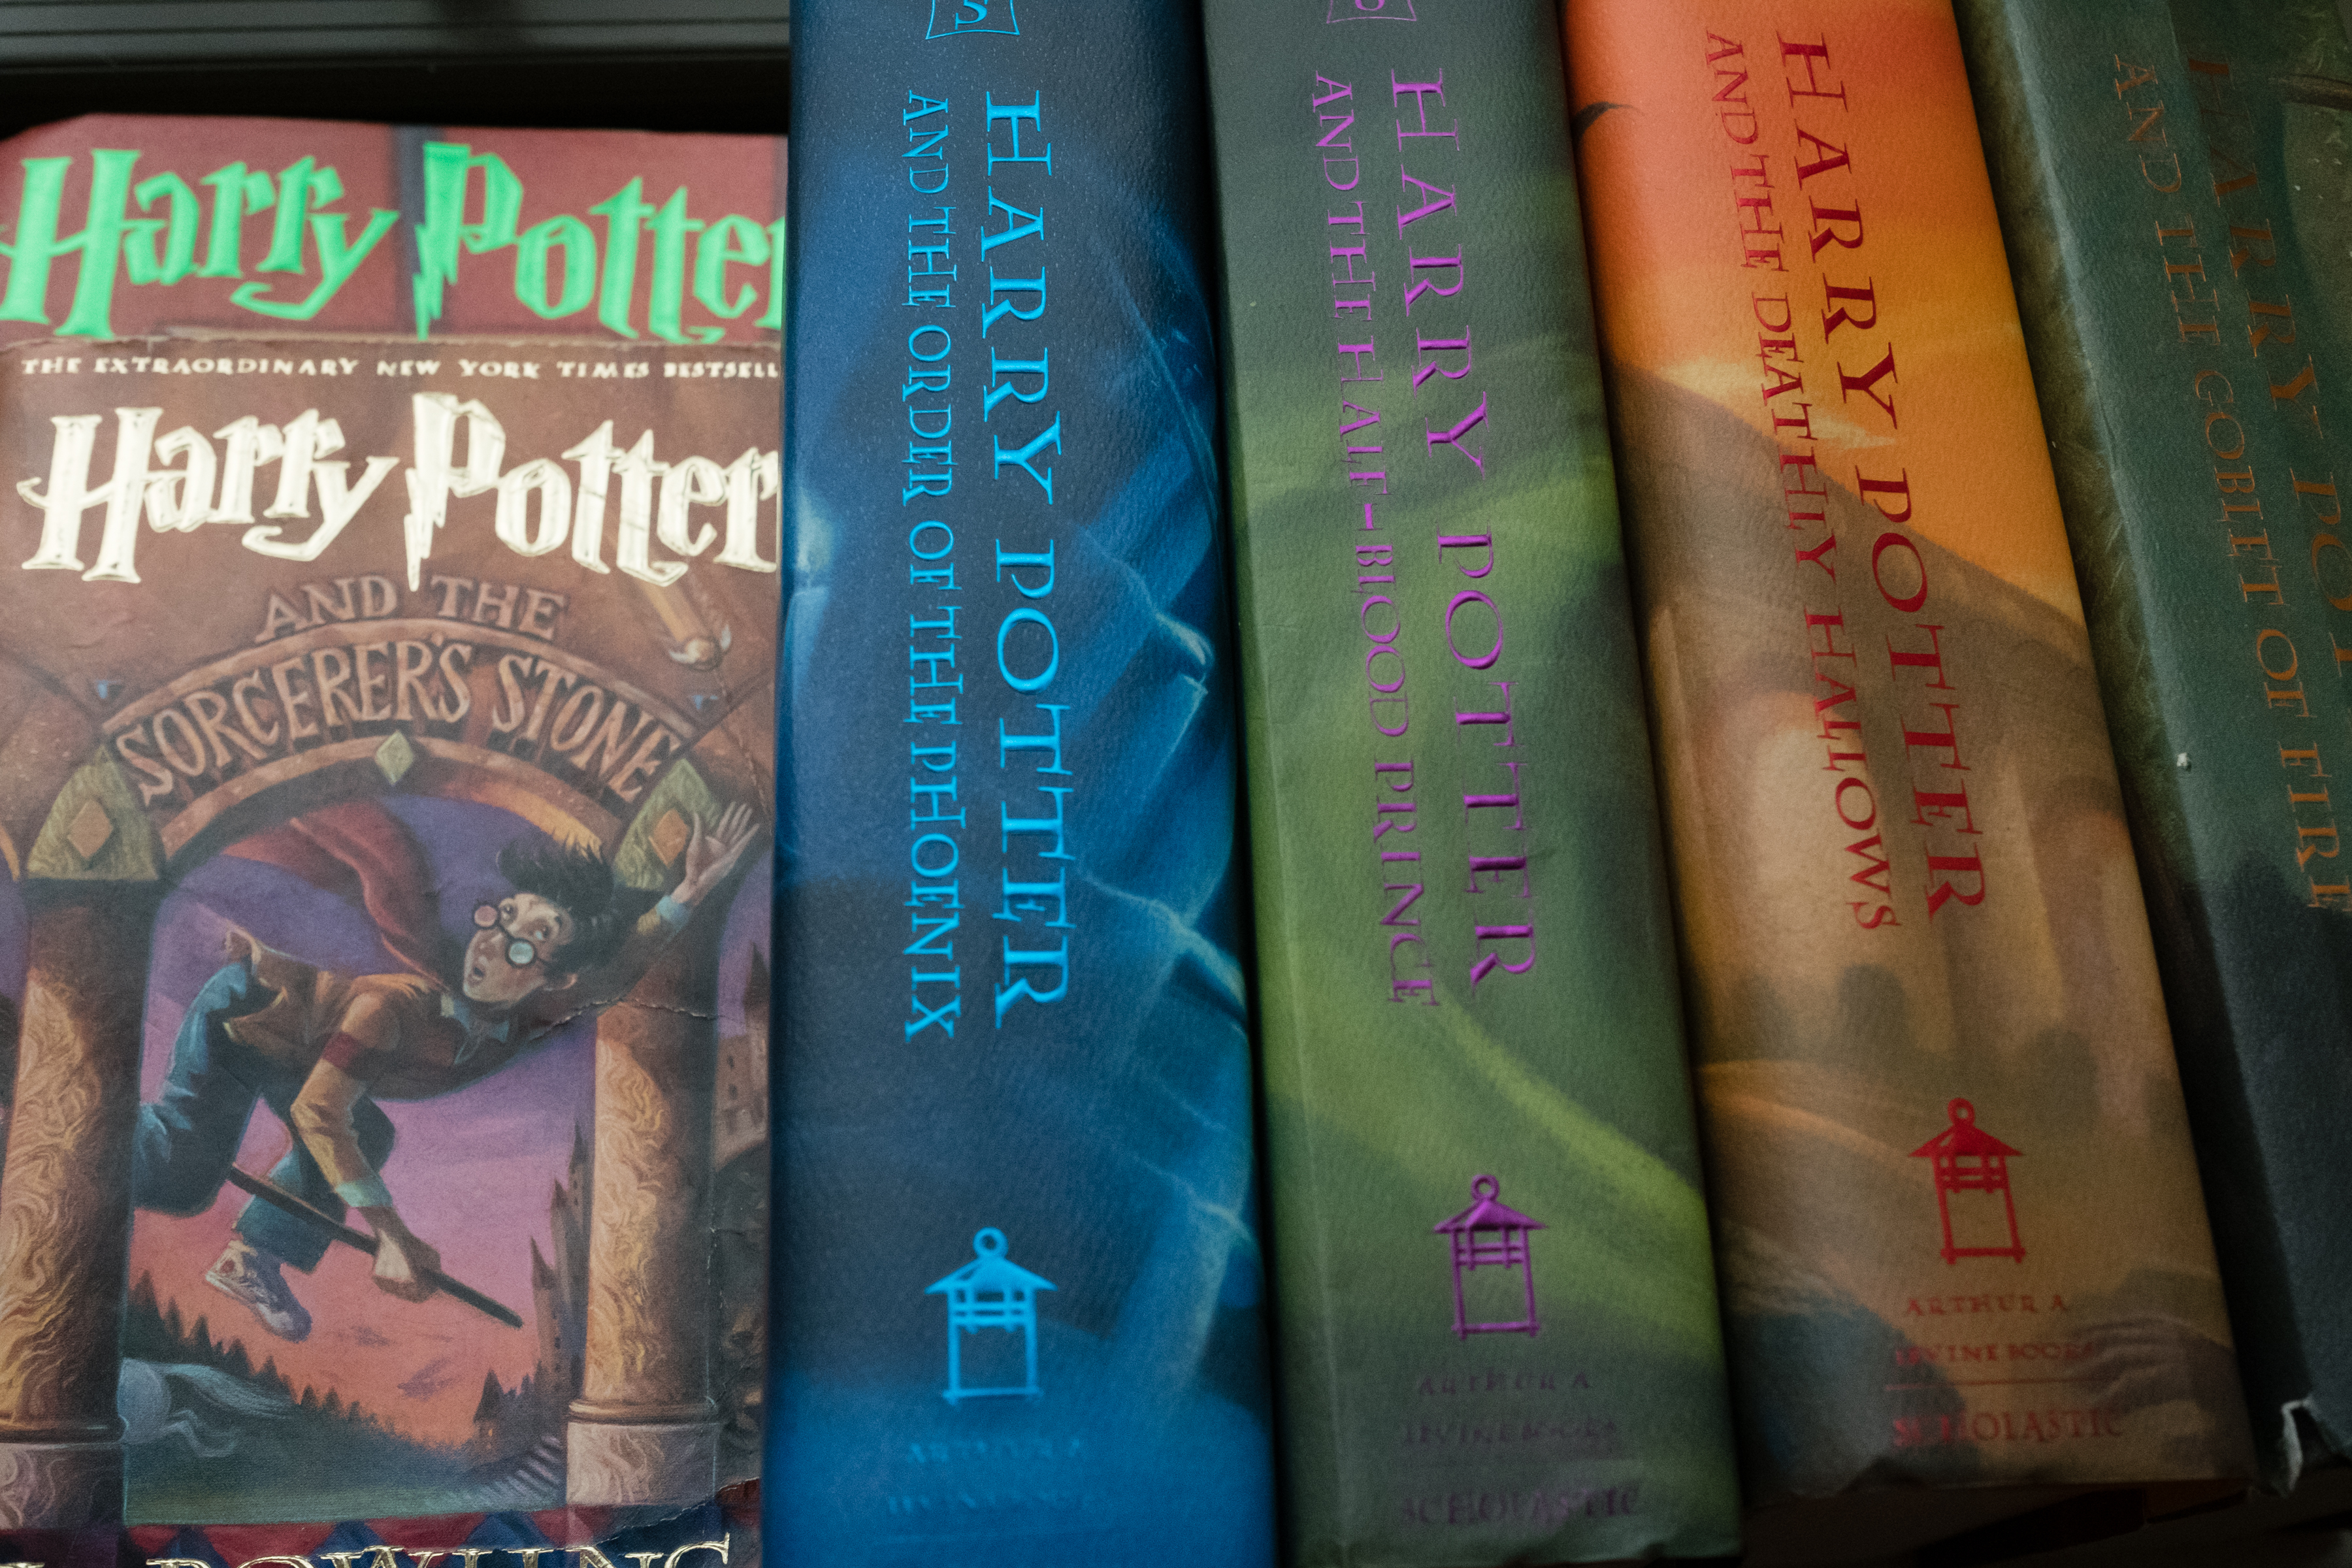 A collection of Harry Potter books are pictured at the home of Caitlin Moore in Washington, DC.